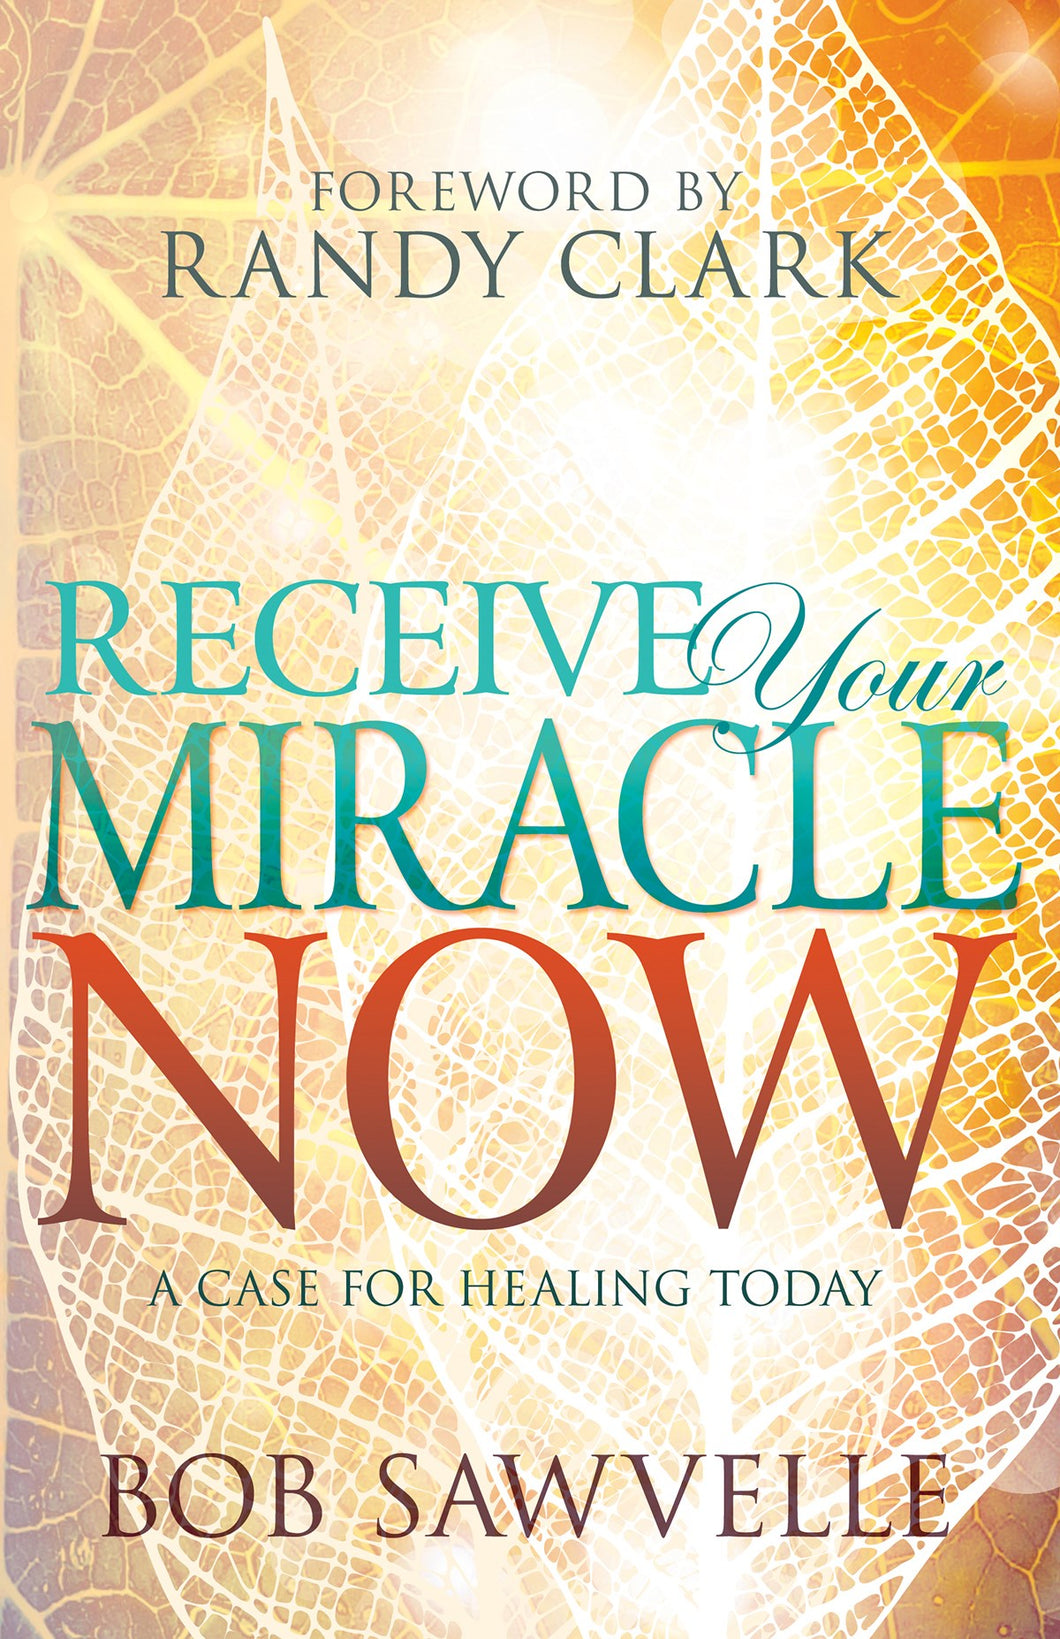 Receive Your Miracle Now